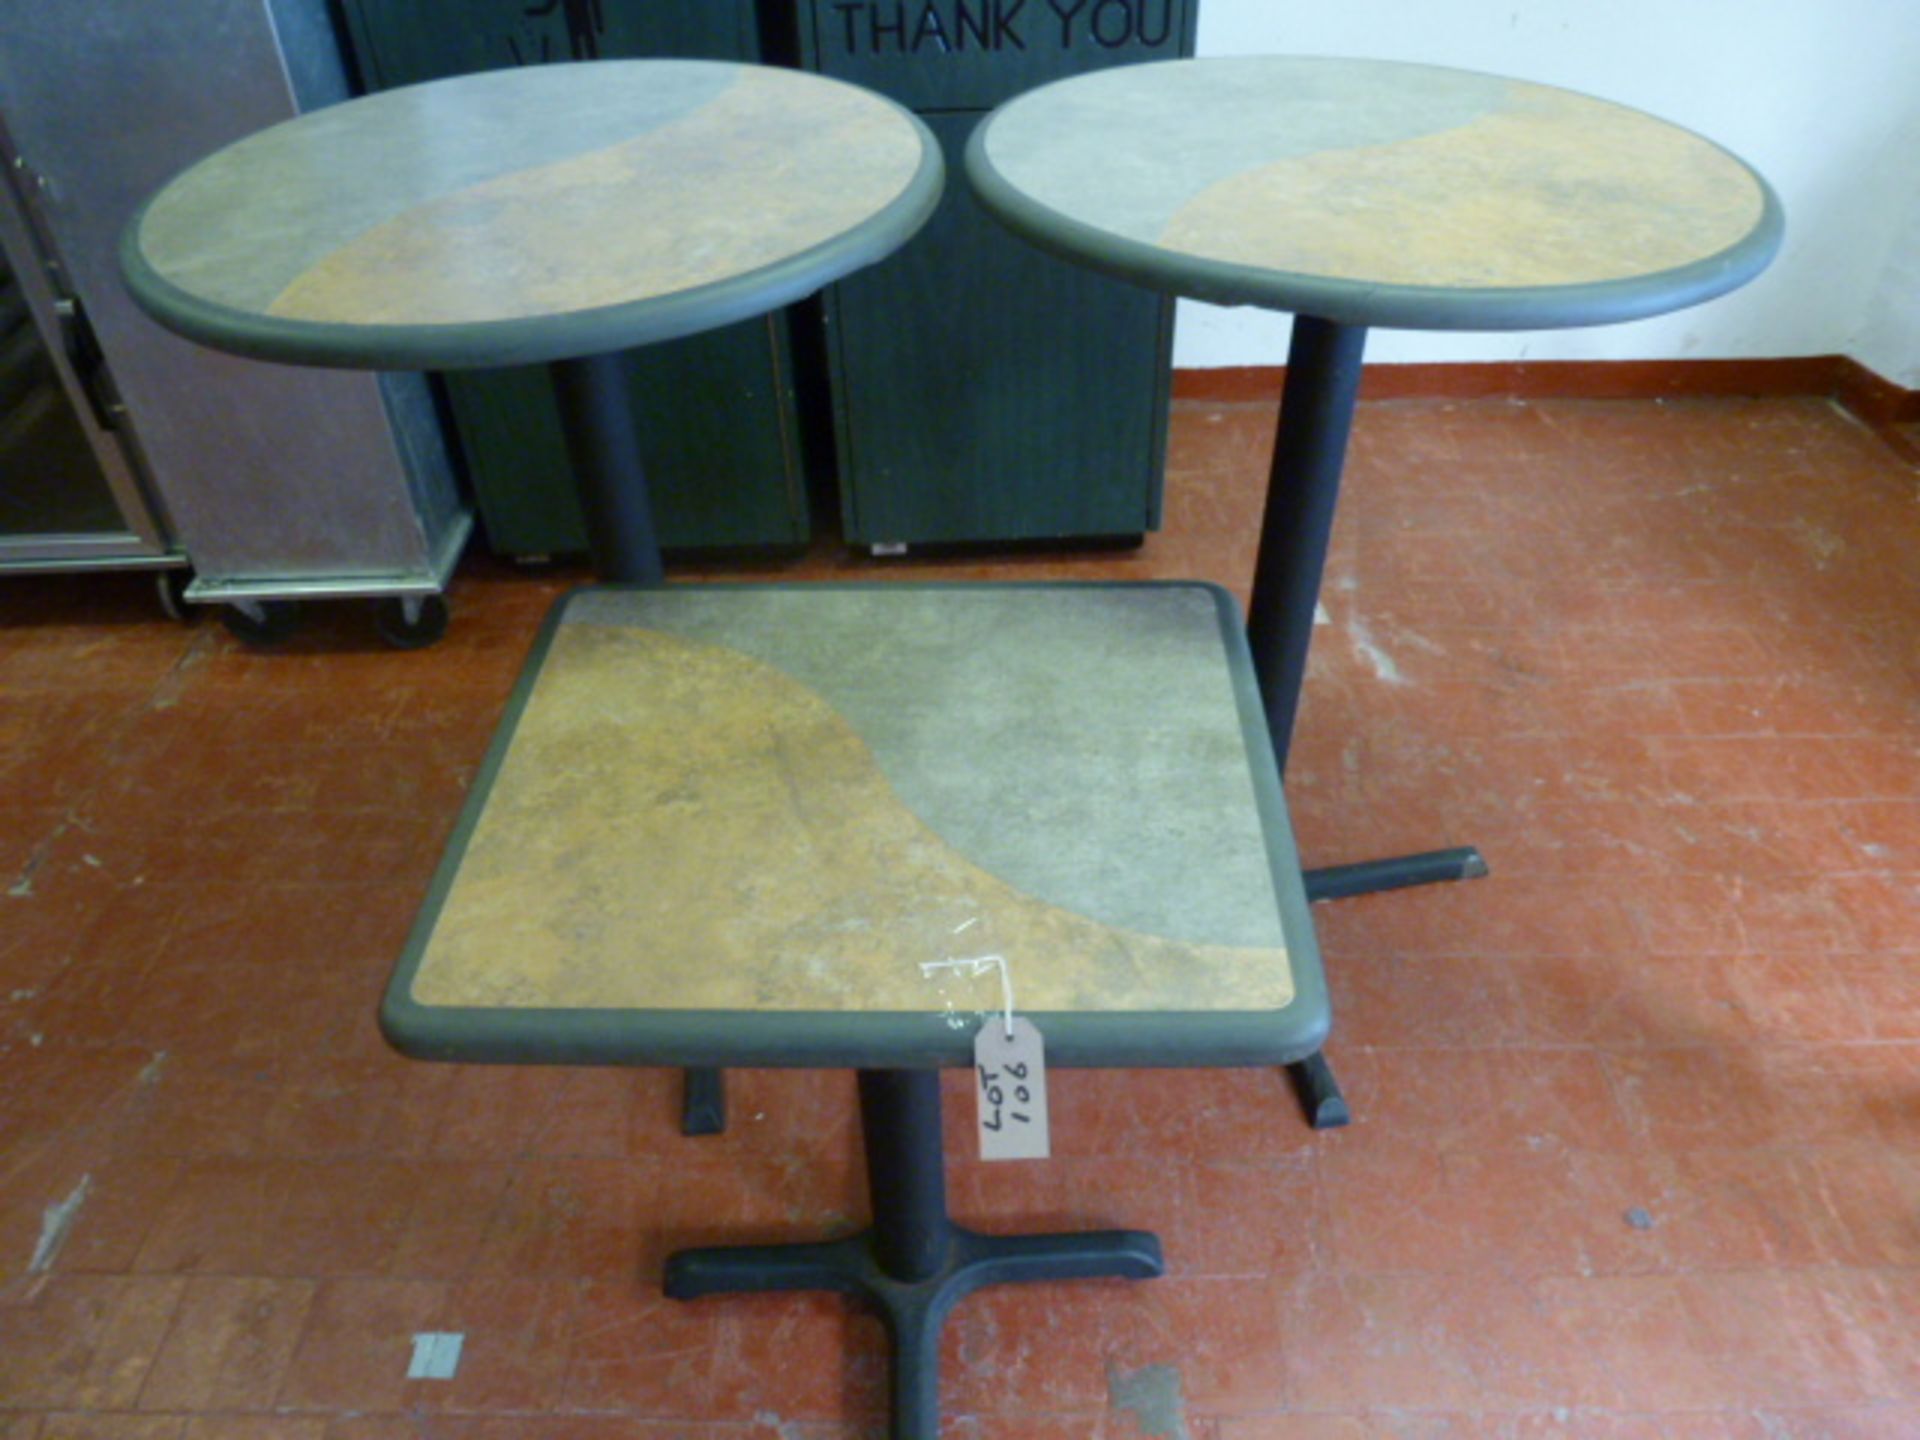 3 x Café Tables to Include: 2 High Round Tables & 1 Square Table with Metal Bases. - Image 2 of 2